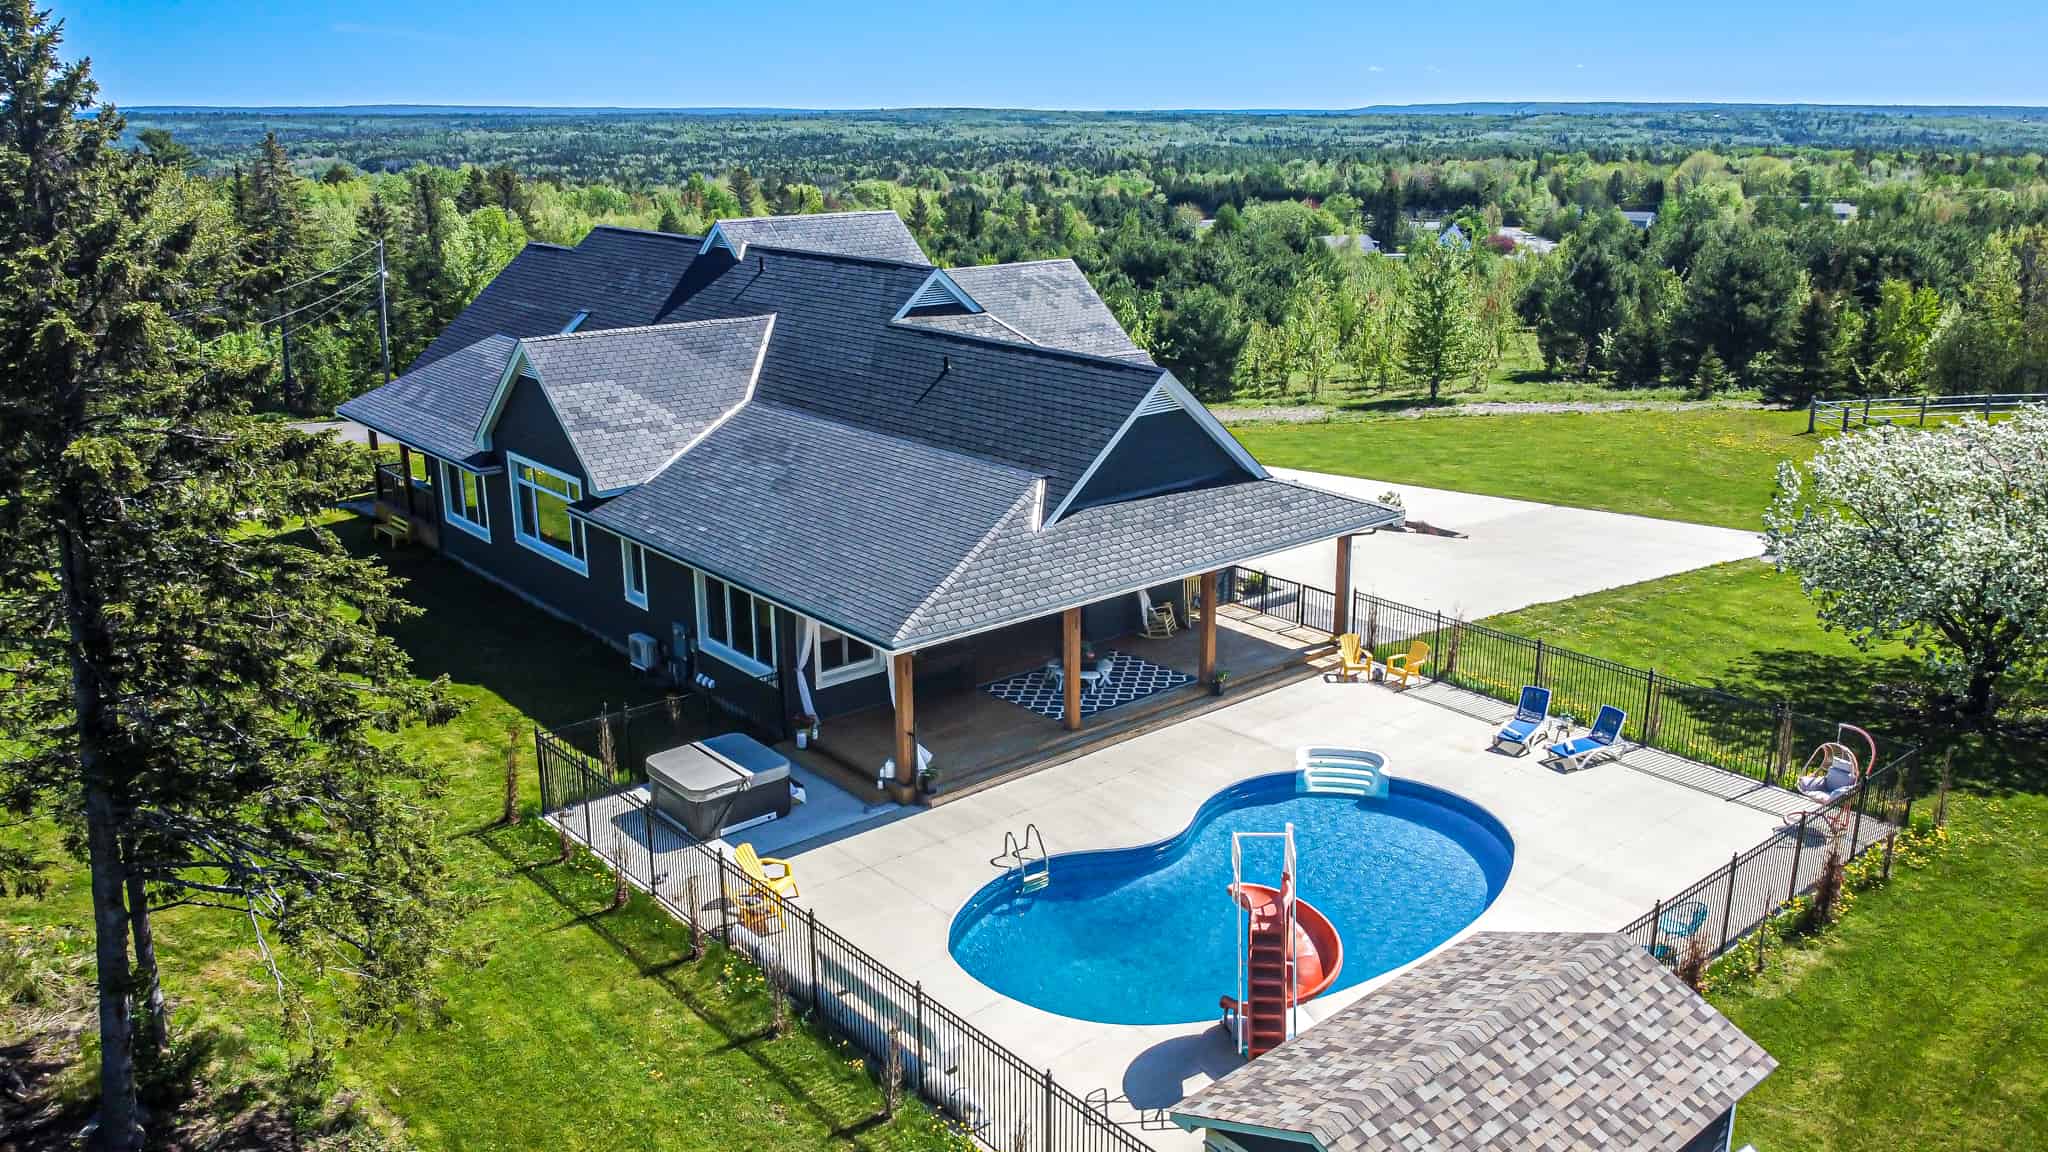 Exterior Aerial image of 1 Sunset Boulevard in Fredericton, New Brunswick showing the fenced-in pool area